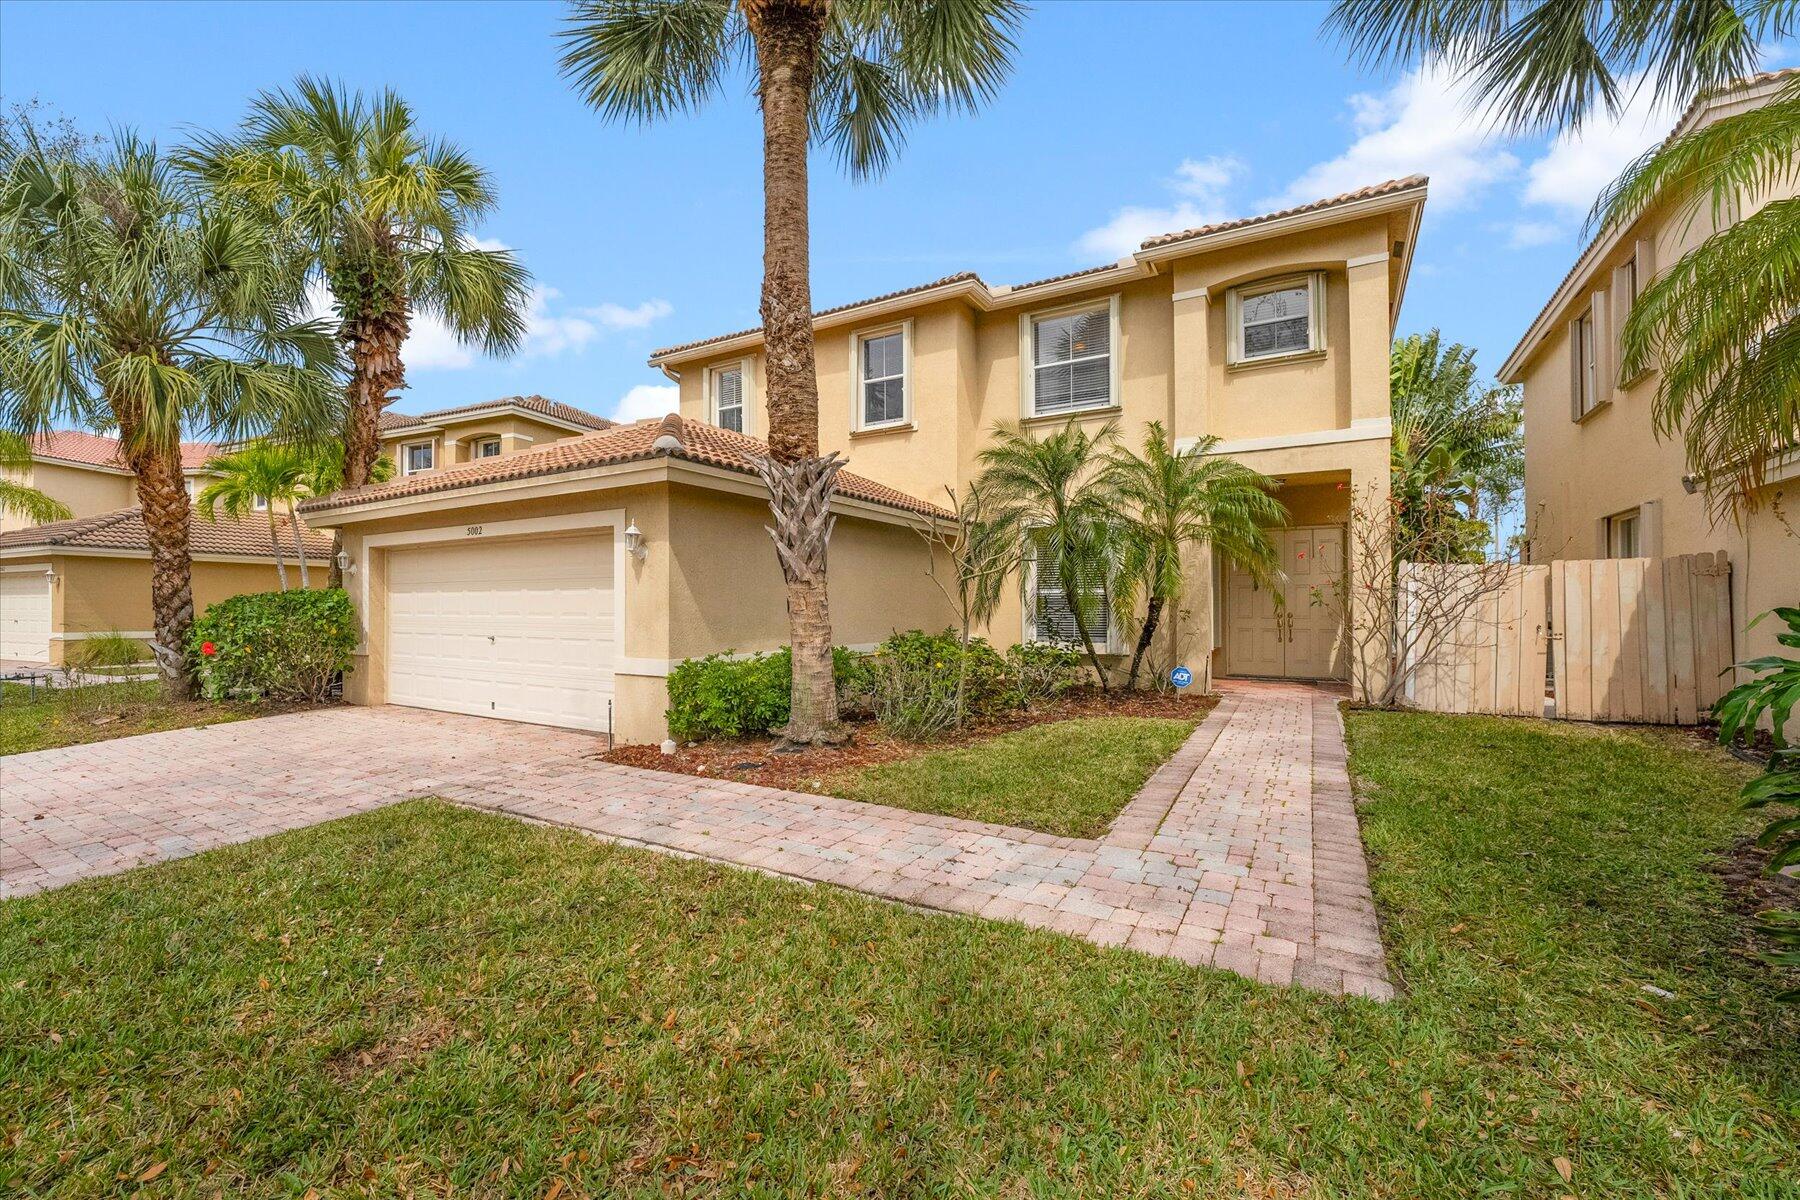 Property for Sale at 5002 Victoria Circle, West Palm Beach, Palm Beach County, Florida - Bedrooms: 5 
Bathrooms: 3.5  - $679,000